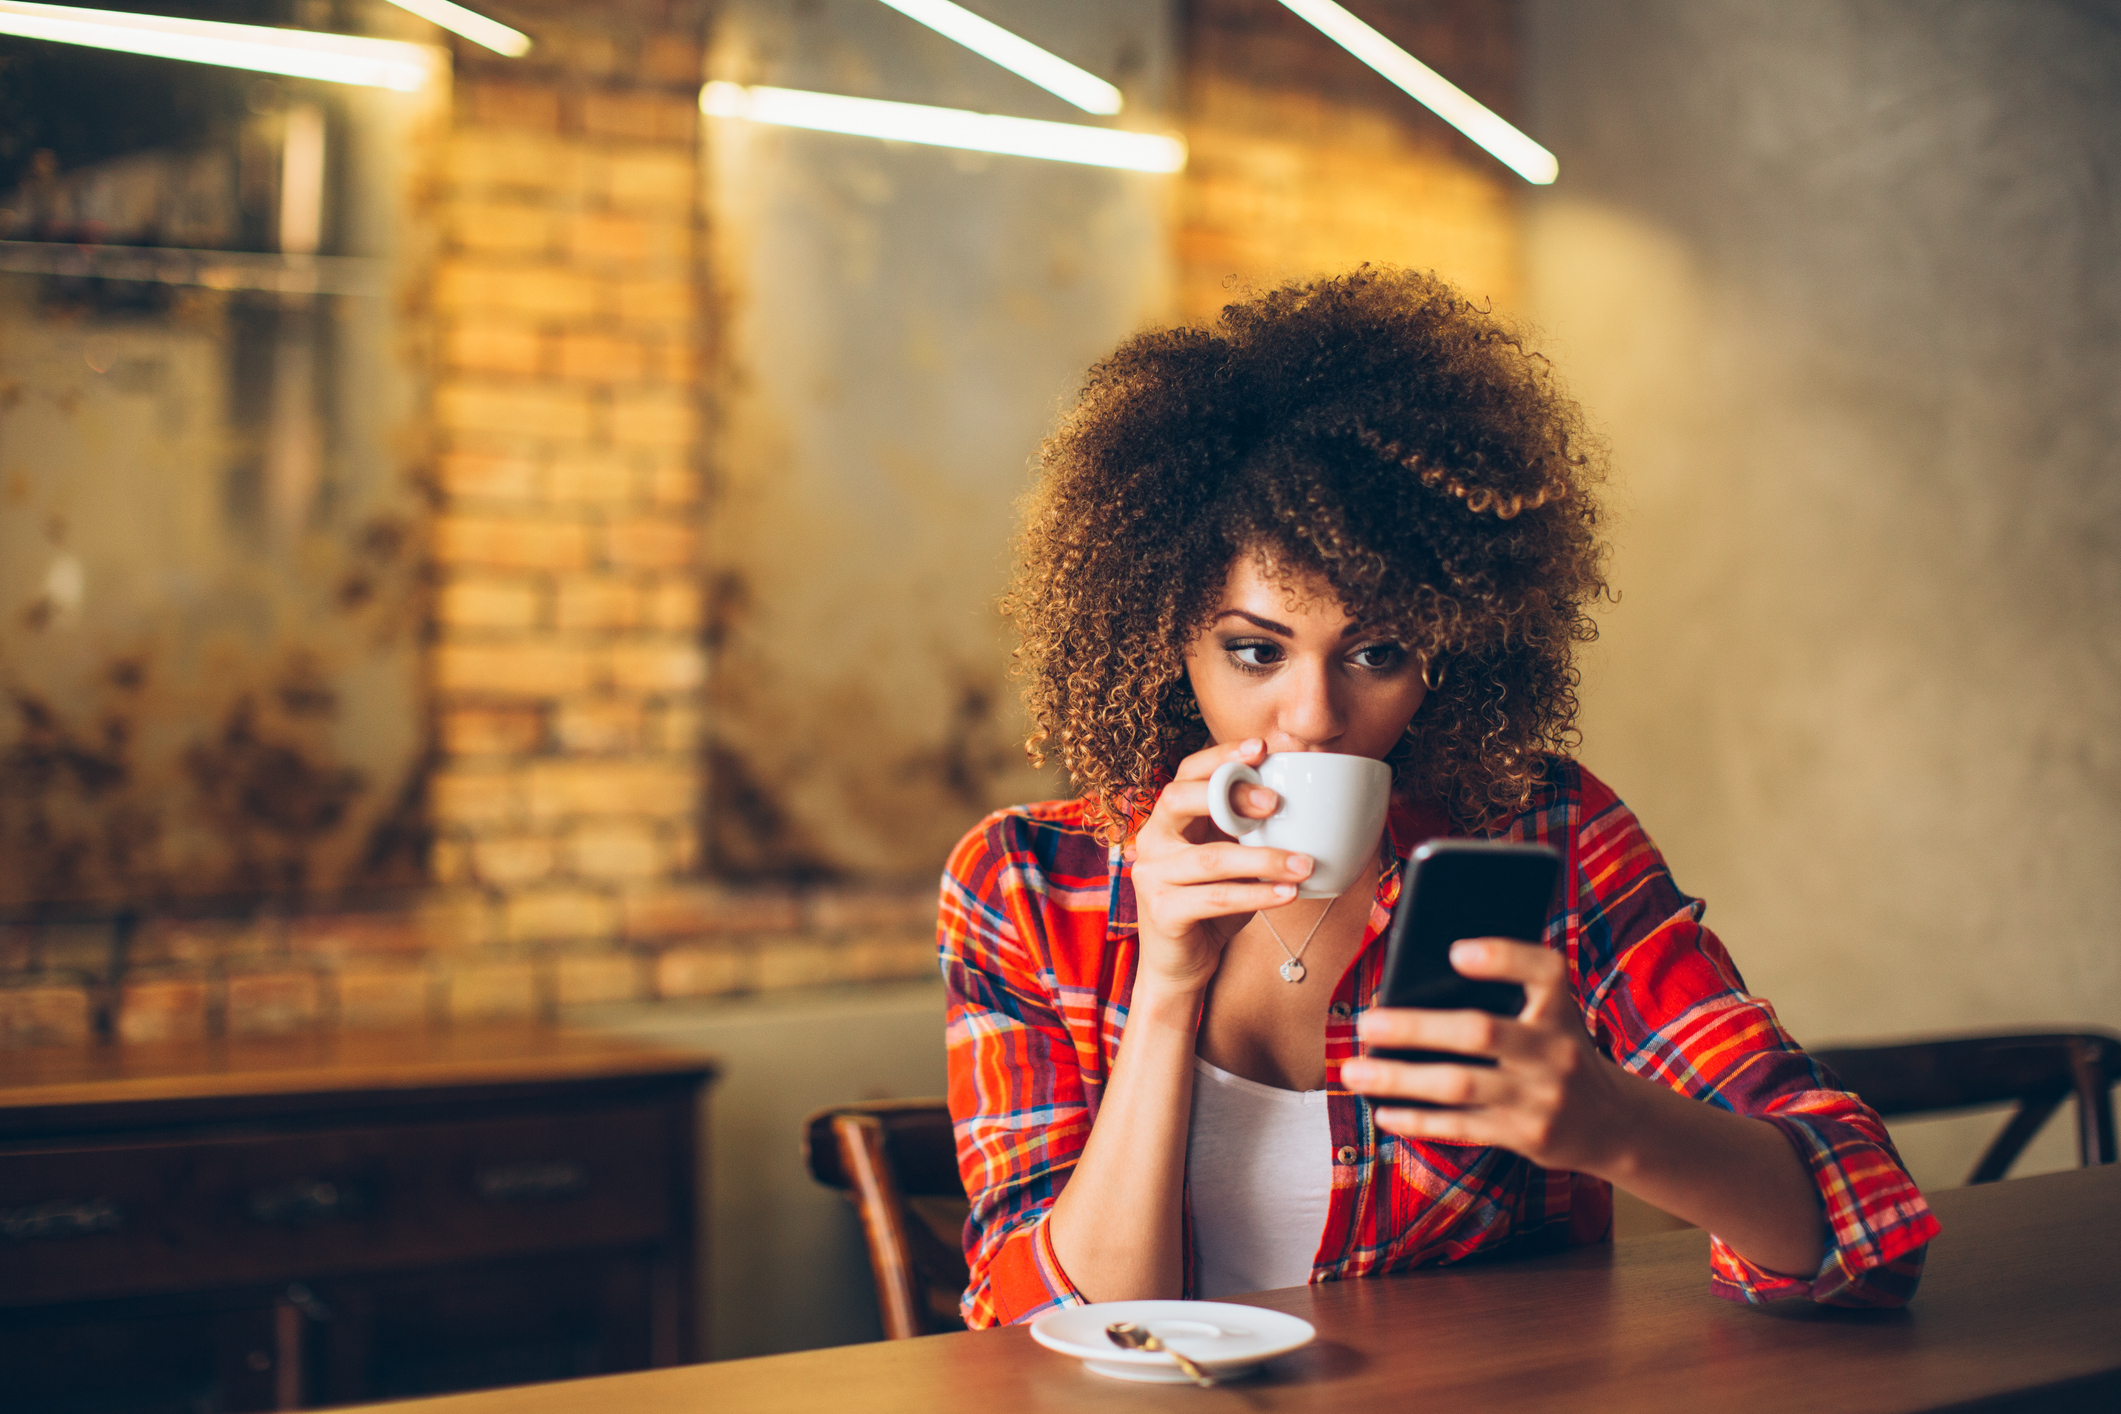 Young woman at cafe drinking coffee and using mobile phone (Thinkstock/PA)